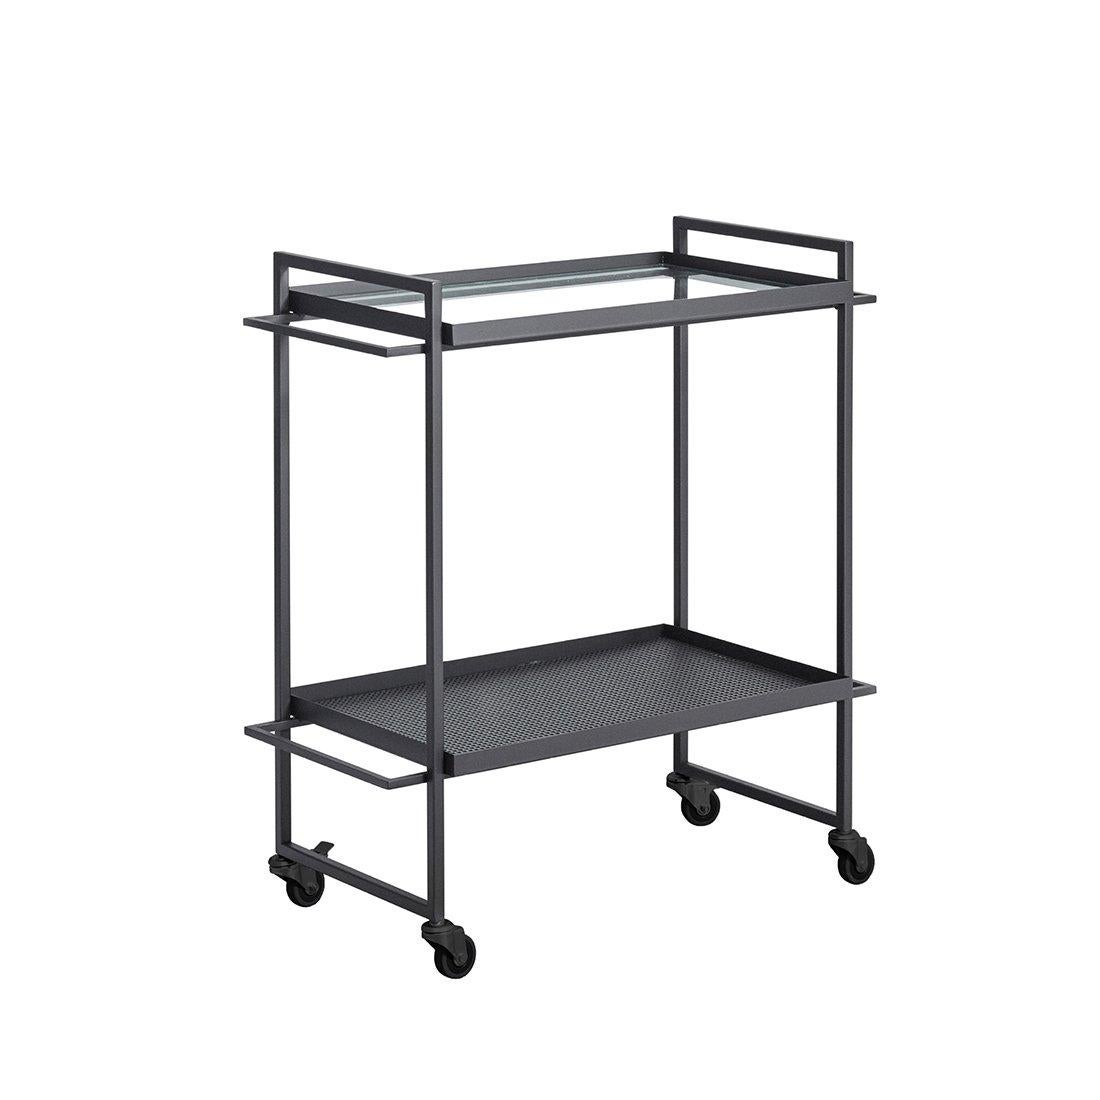 Bauhaus trolley by Kristina Dam Studio
Materials: Black powder-coated steel and glass. 
Also available in different colors.
Dimensions: 35 x 72 x h 77cm.

The Modernist furniture collection takes notions of modern design and yet the distinctive